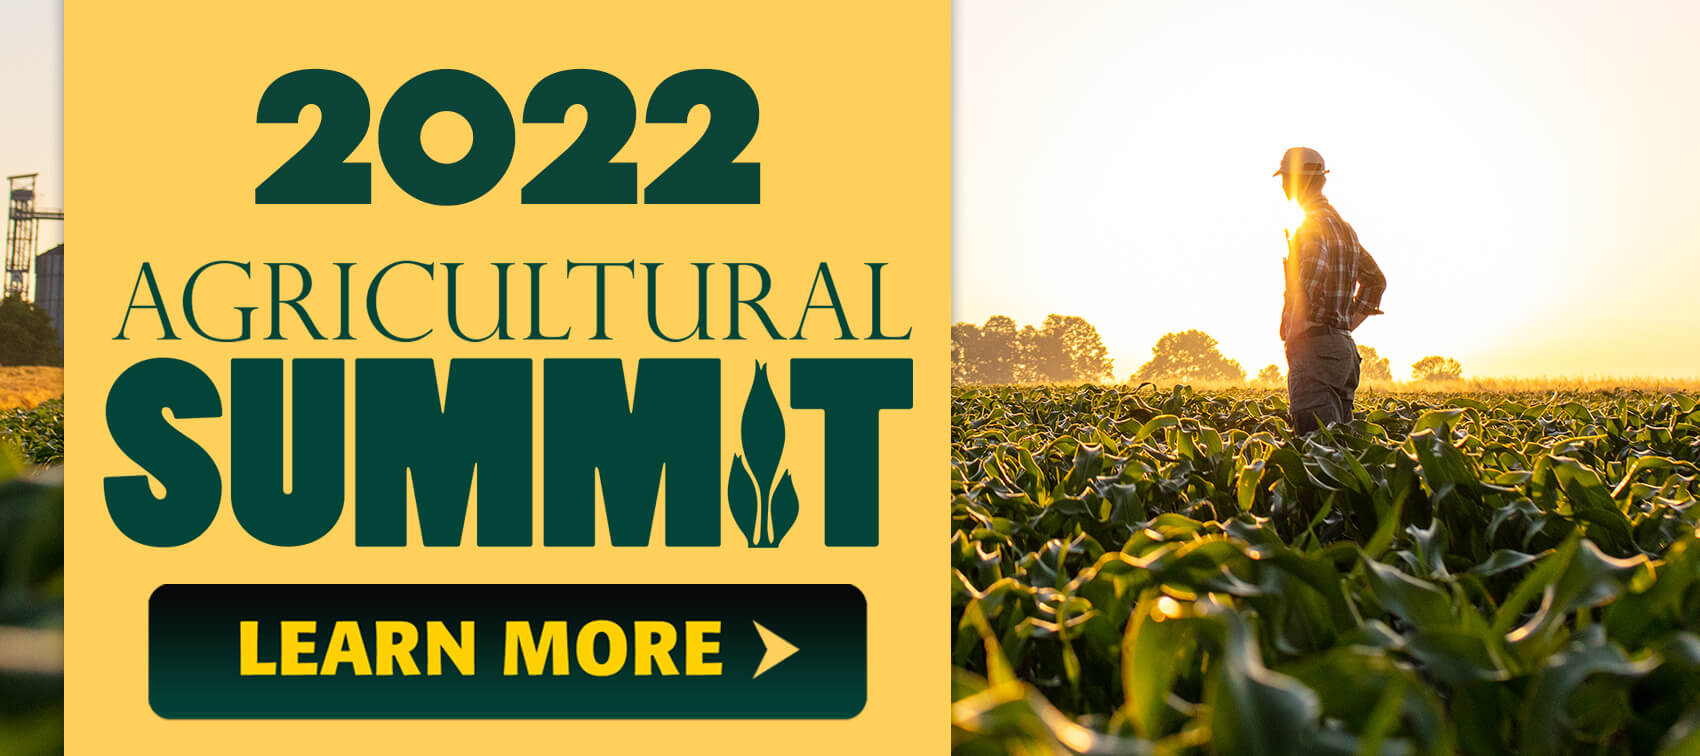 Learn about the 2022 Agricultural Summit